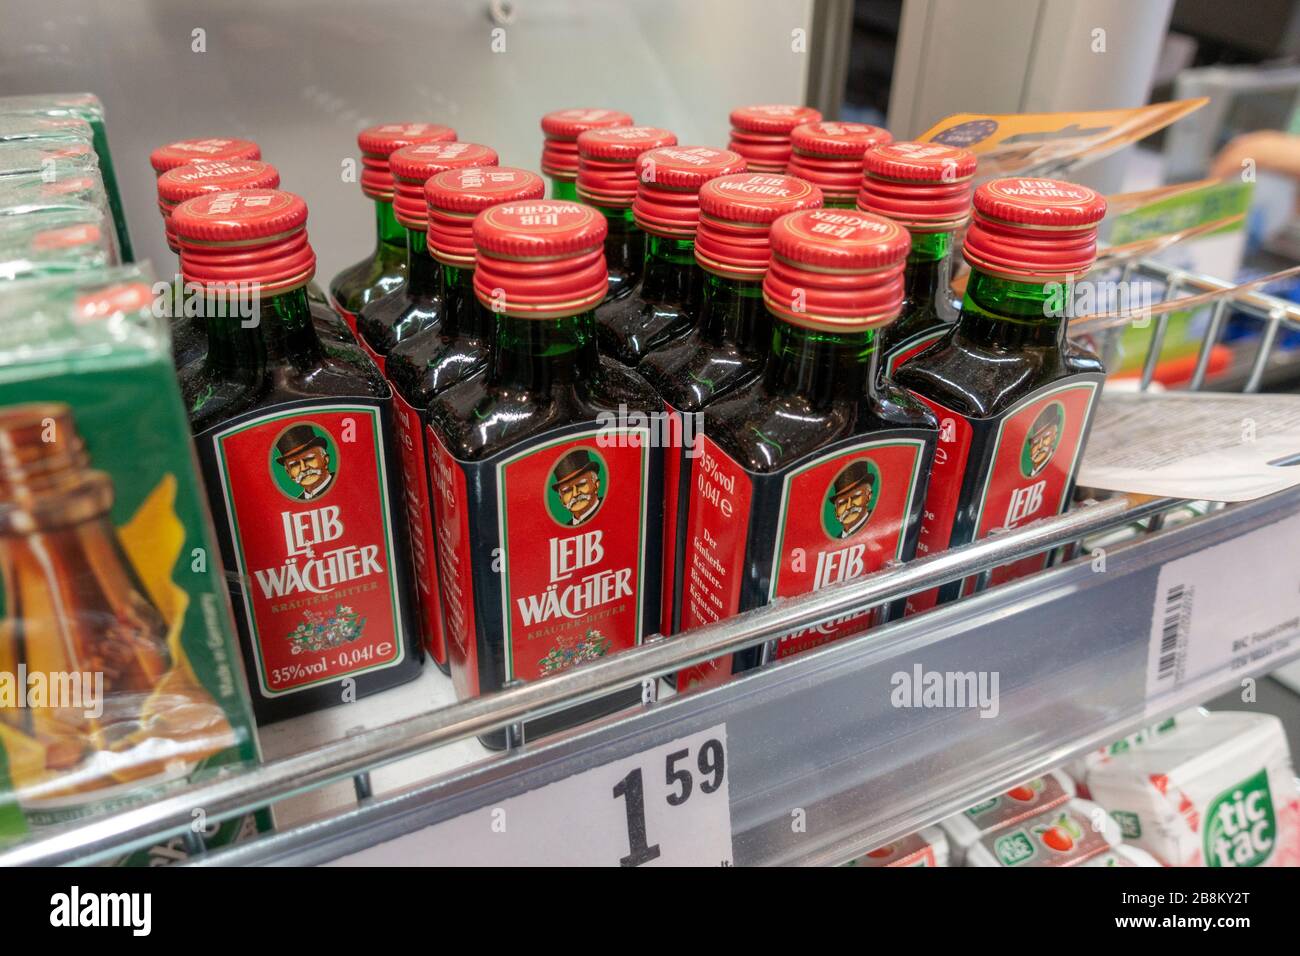 Bottles of Leib Wächter, a bitter herbal liqueur from Germany on a shop shelf in Austria. Stock Photo